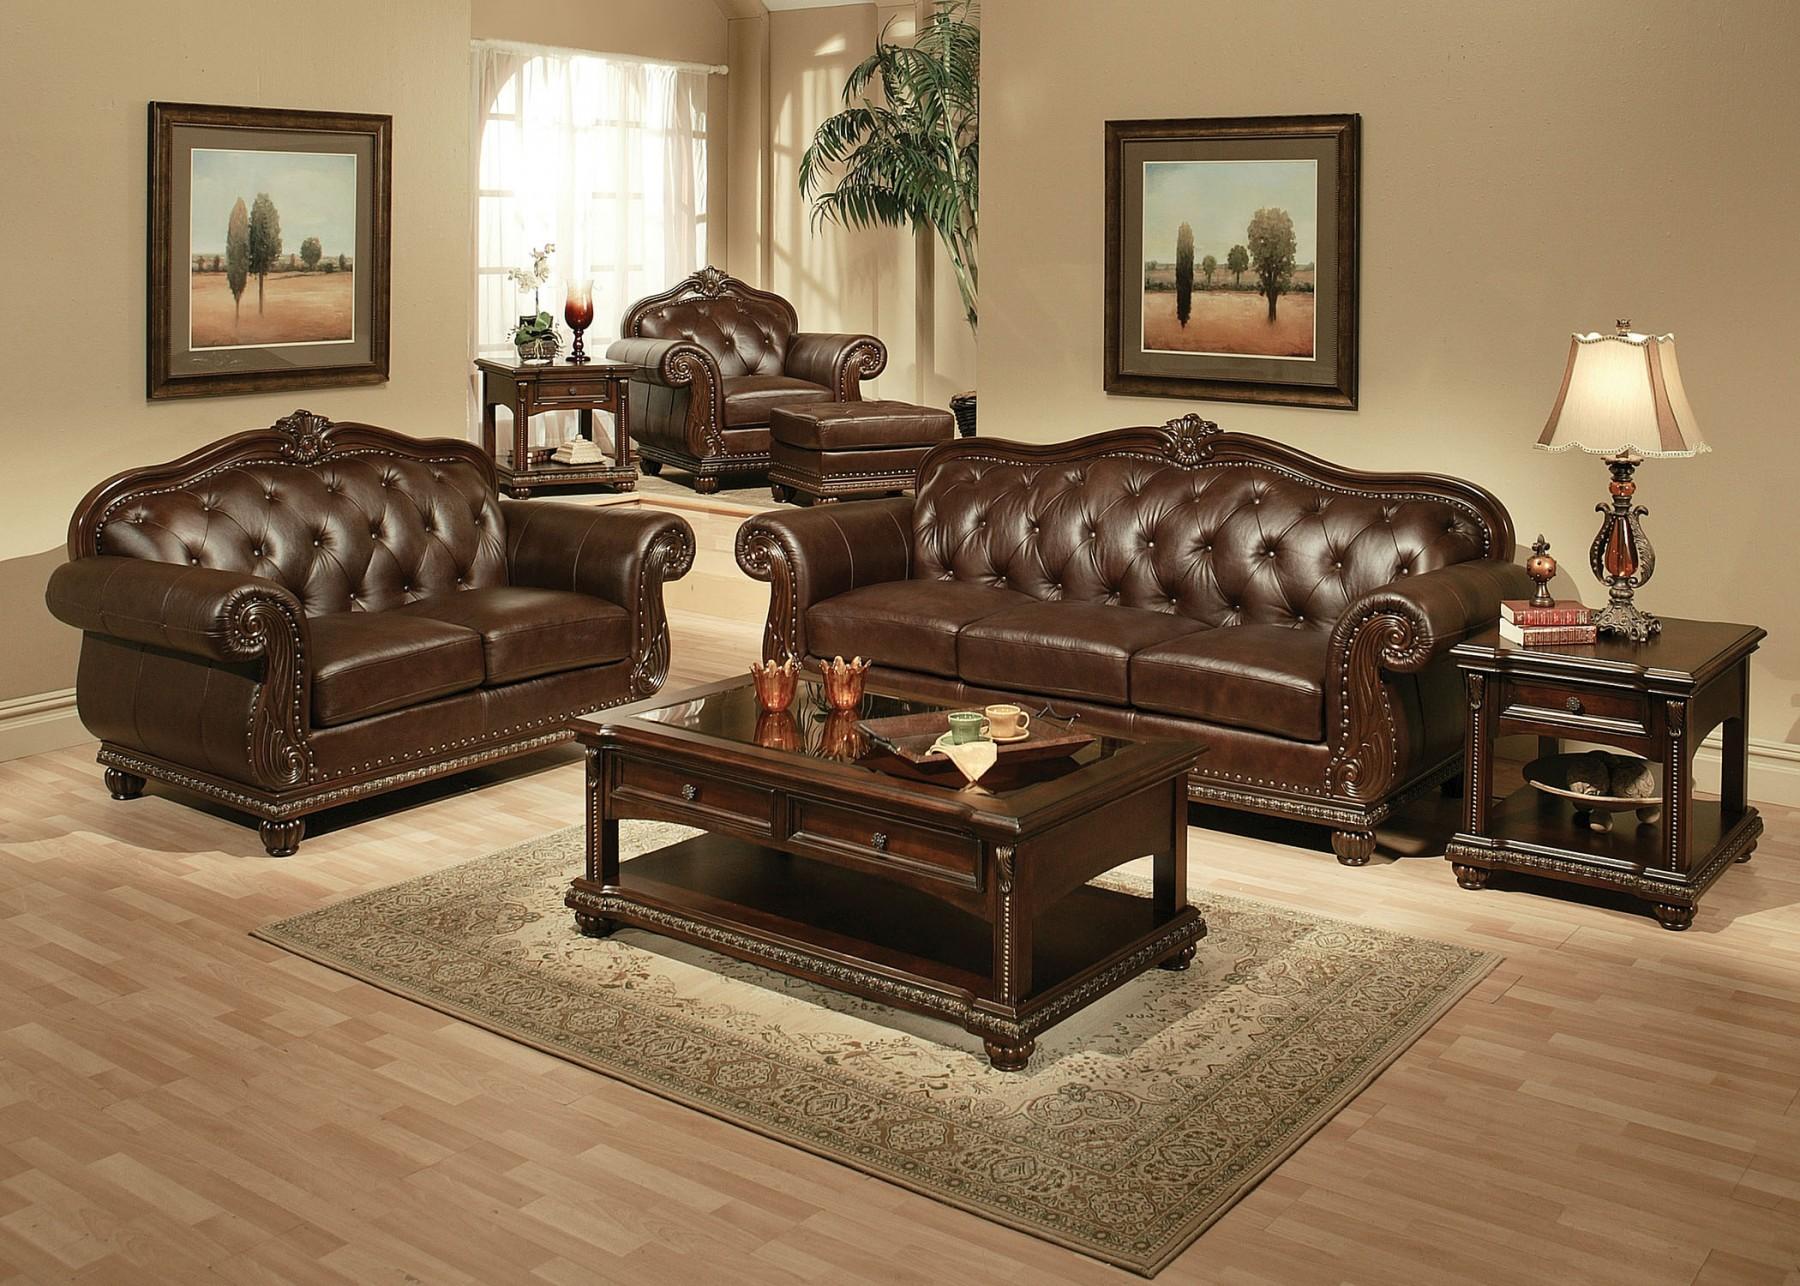 Classic, Traditional Sofa Loveseat and Table Set Anondale 15030 Set 15030 Anondale-Set-5 in Cherry, Espresso Top grain leather